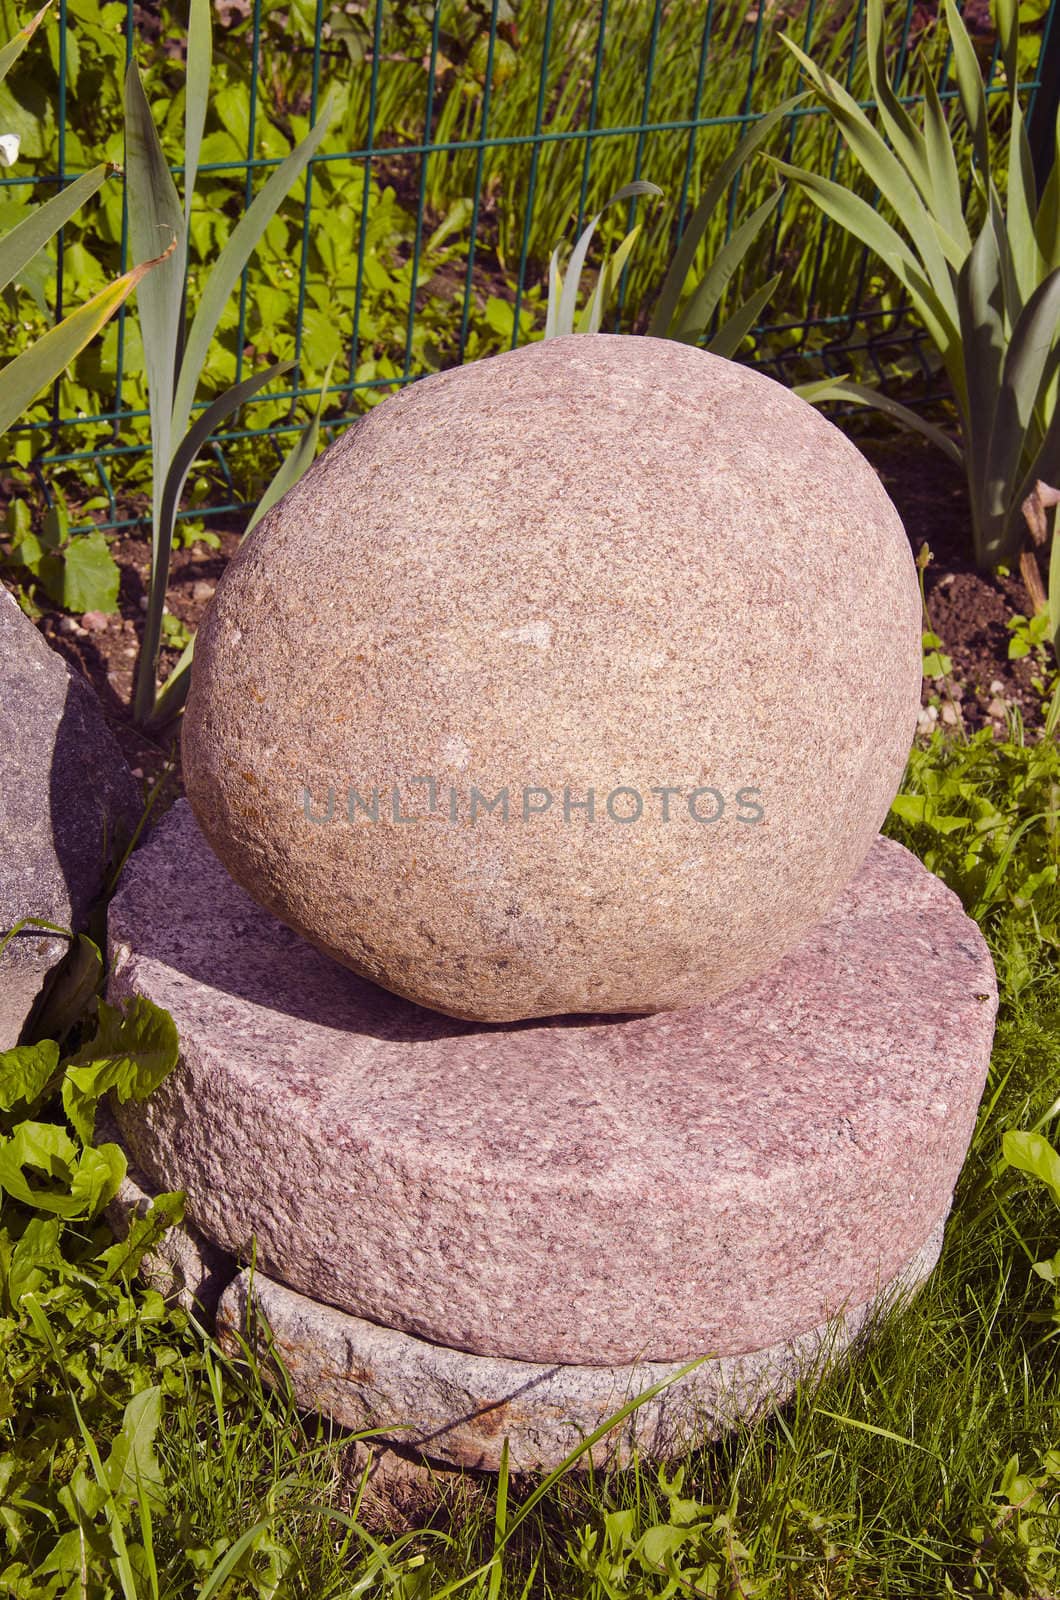 Several mill stones on top of one another and stone on top.